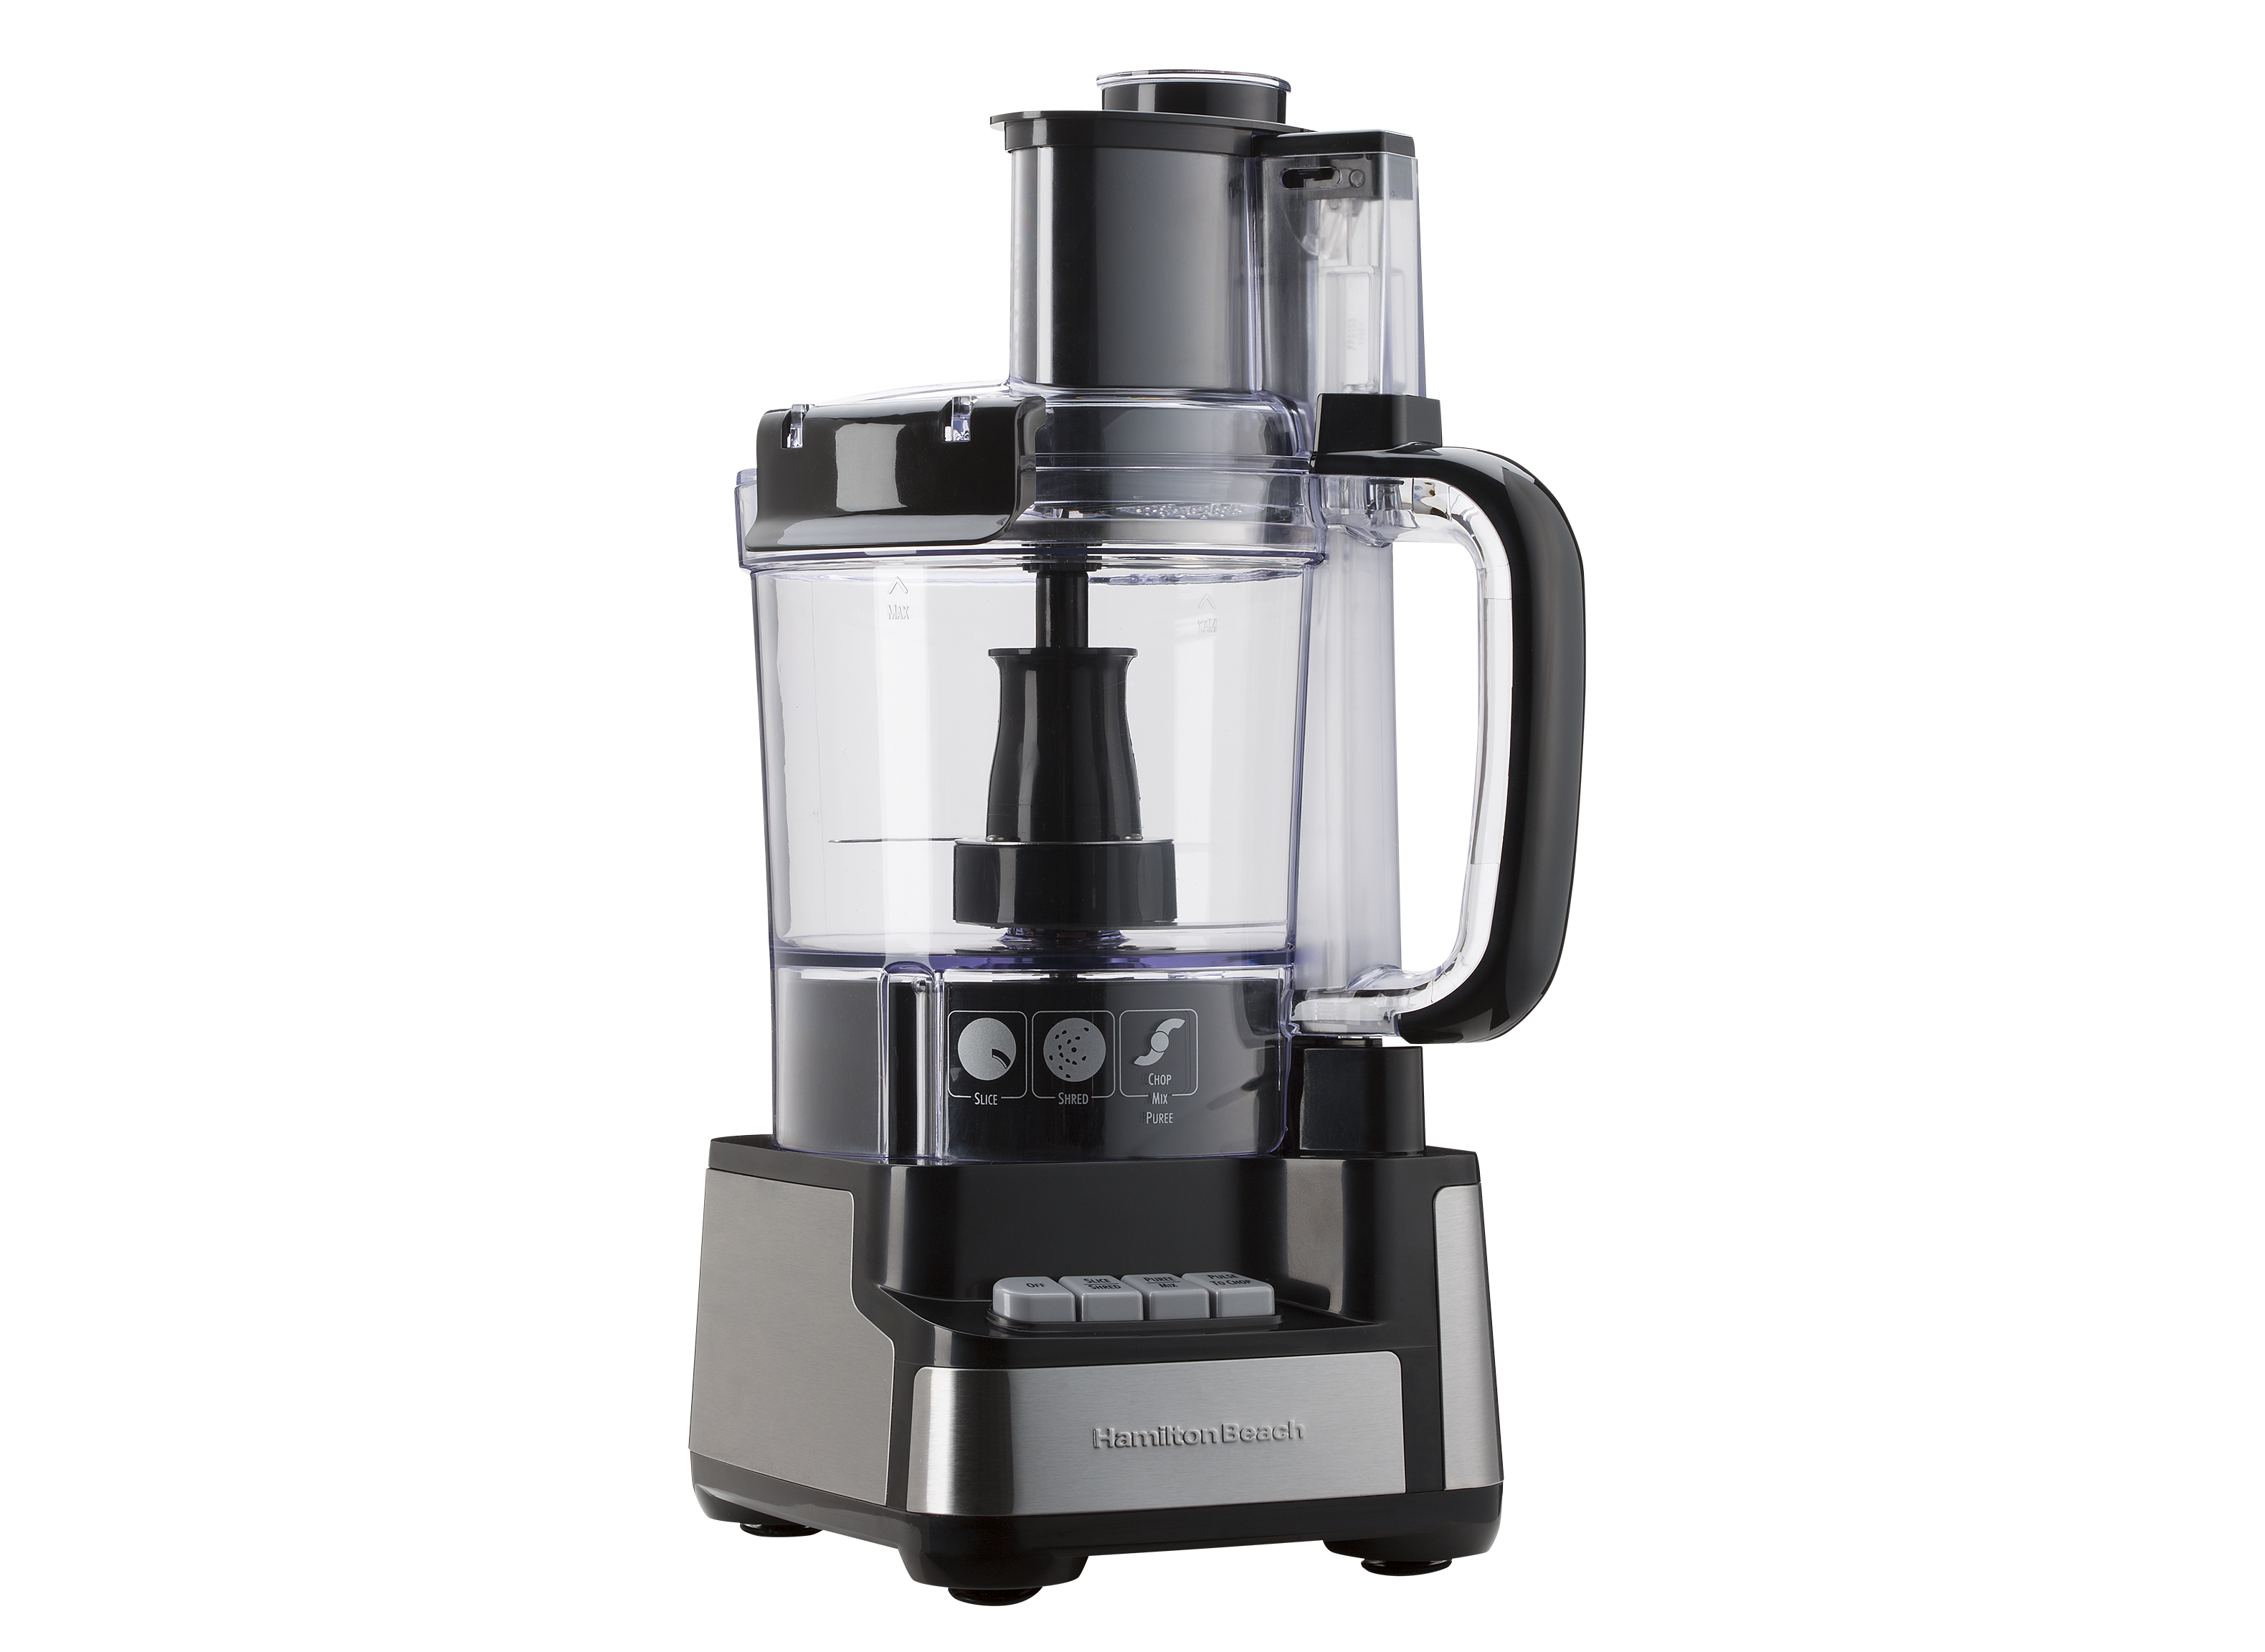 https://crdms.images.consumerreports.org/prod/products/cr/models/379155-foodprocessors-hamiltonbeach-stacksnap70725.png